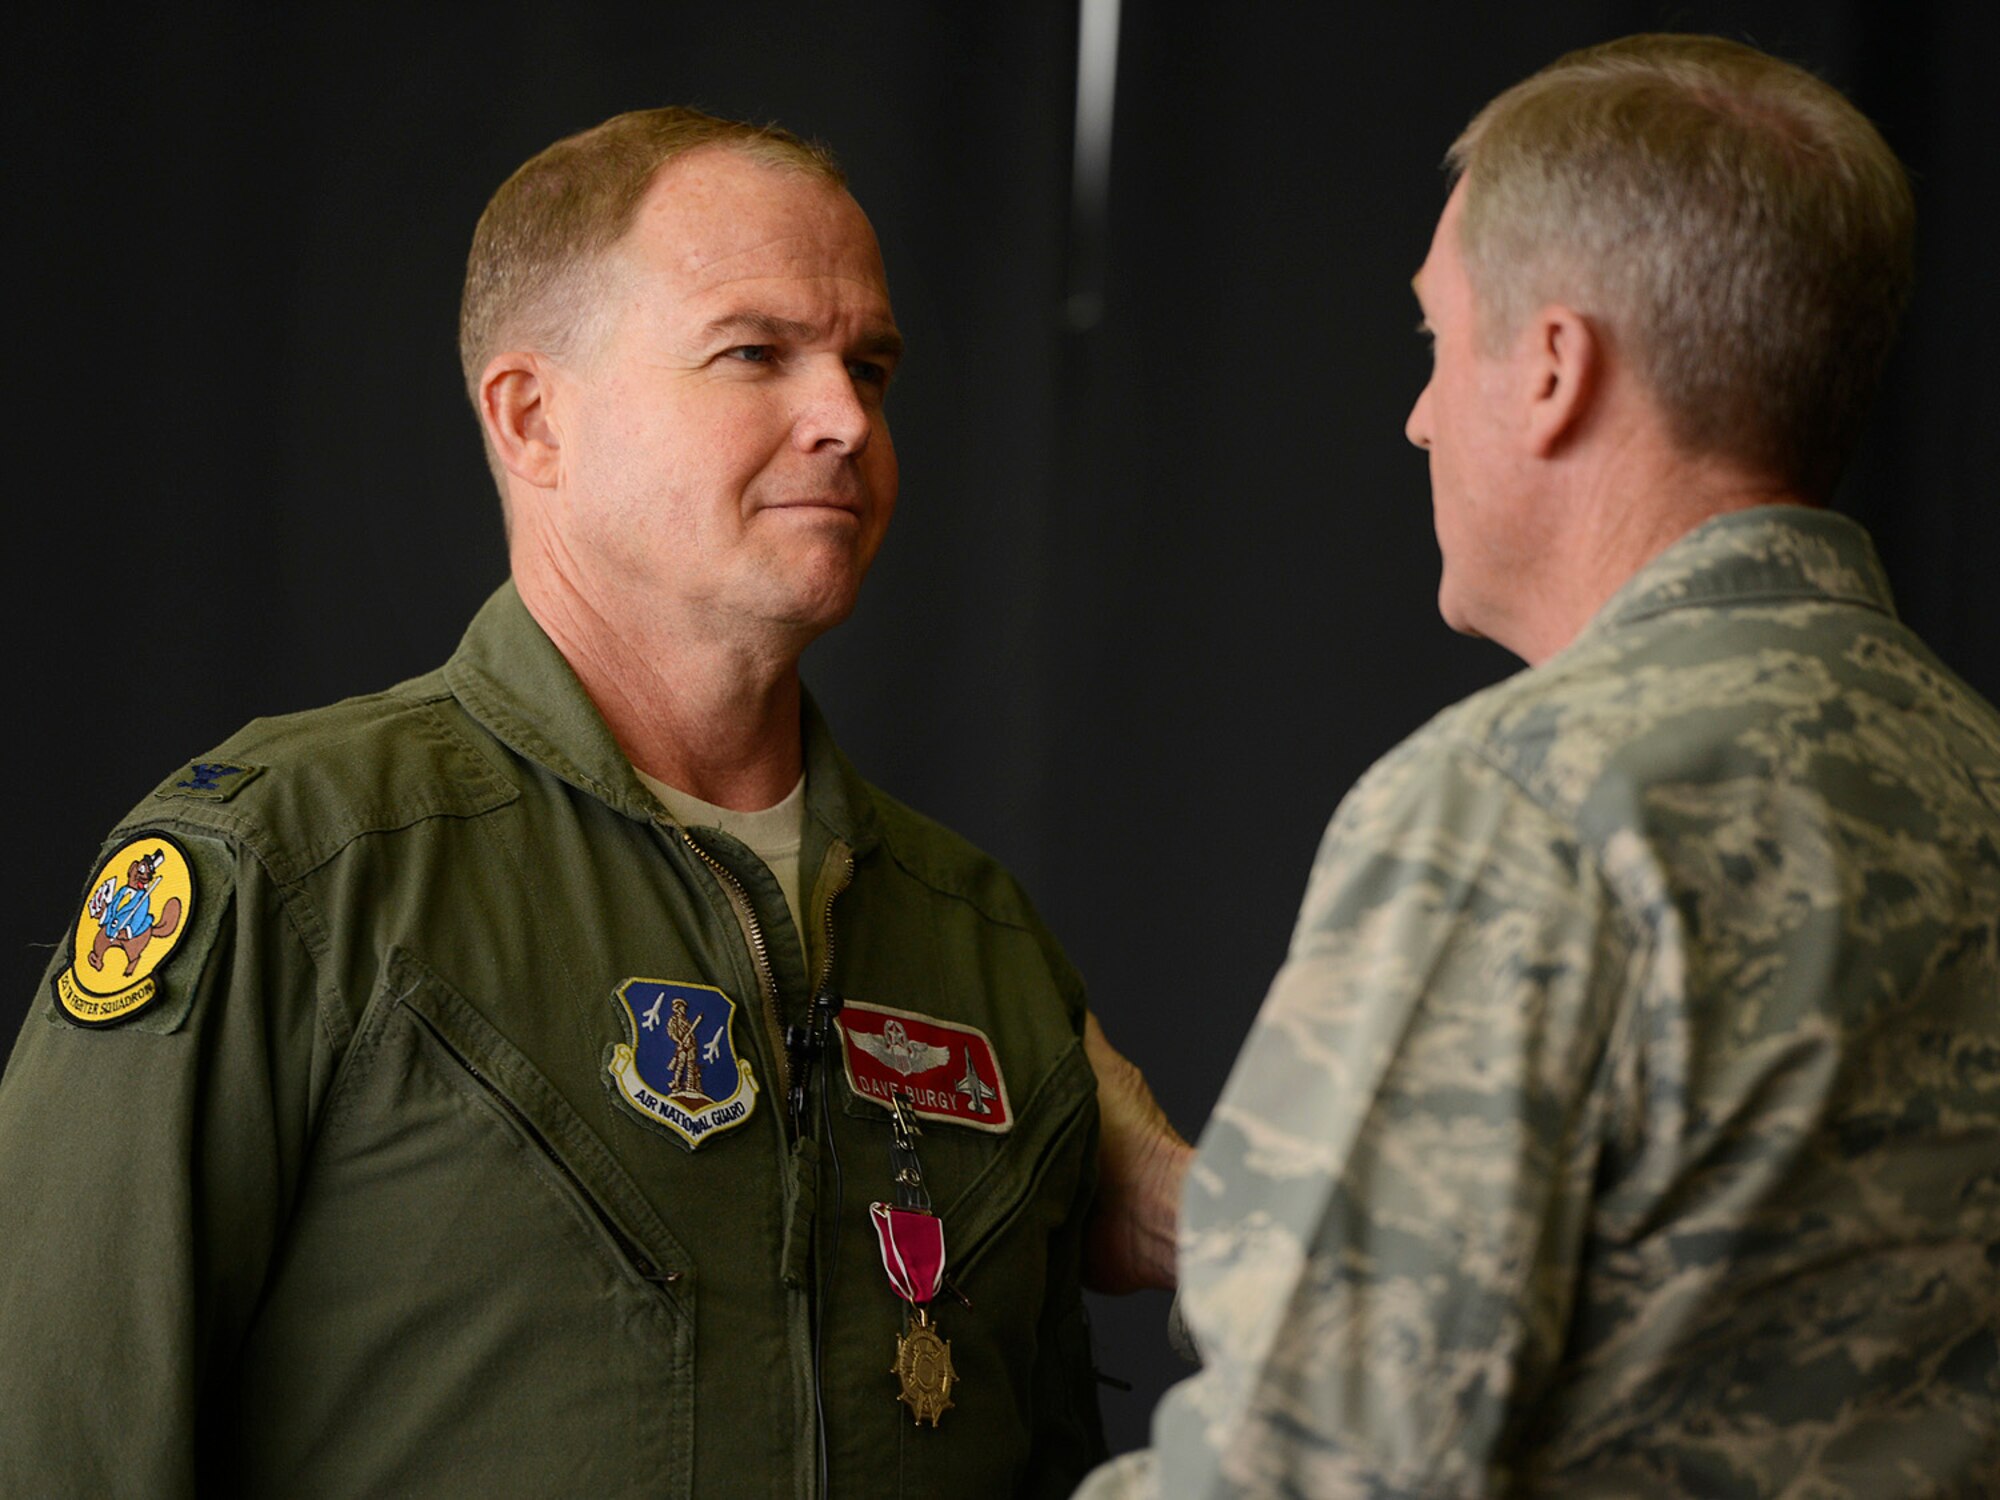 Colonel David B. Burgy, 138th Fighter Wing Commander, receives congratulations from Brigadier General Greg Ferguson, Assistant Adjutant General Air, after receiving the Legion of Merit medal during a Commanders Call at the Tulsa Air National Guard base, June 8, 2014.     (U.S. National Guard photo by Master Sgt.  Mark A. Moore/Released)